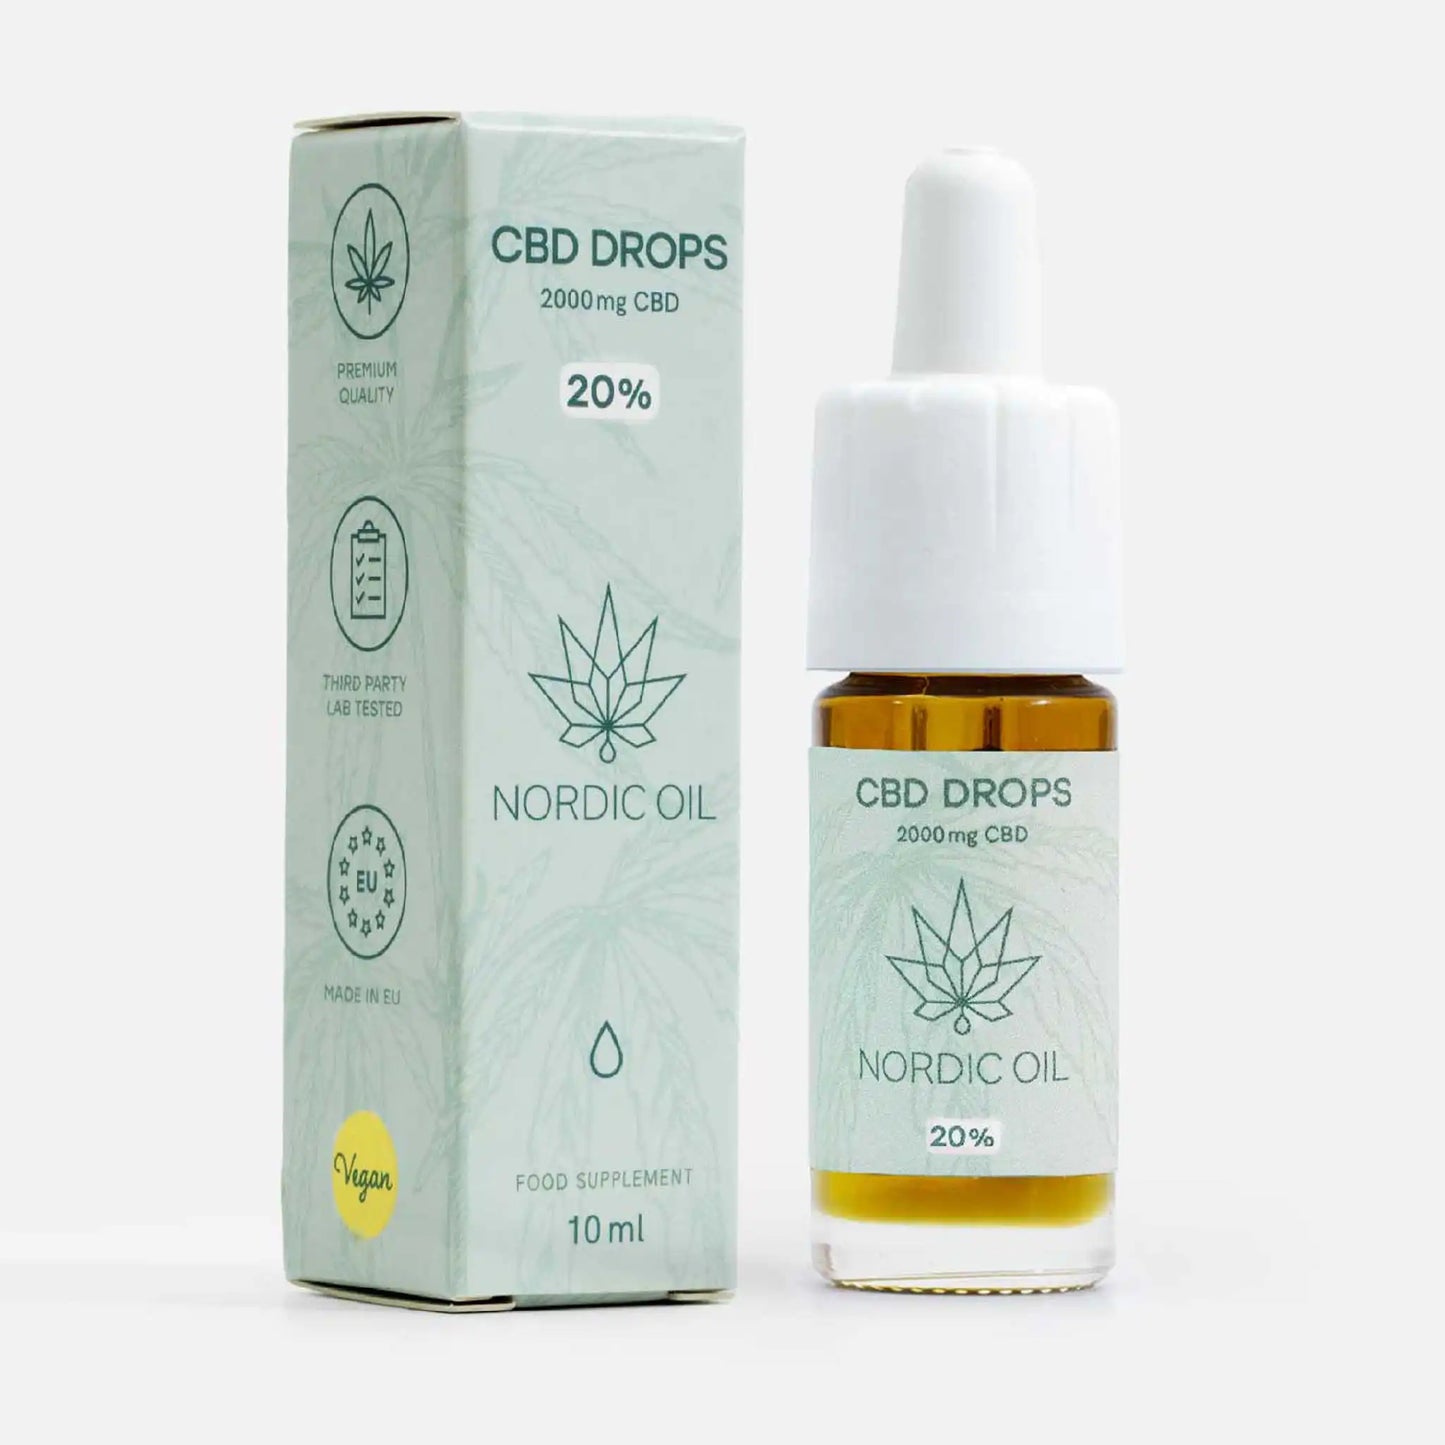 cbd oil - product and packaging 